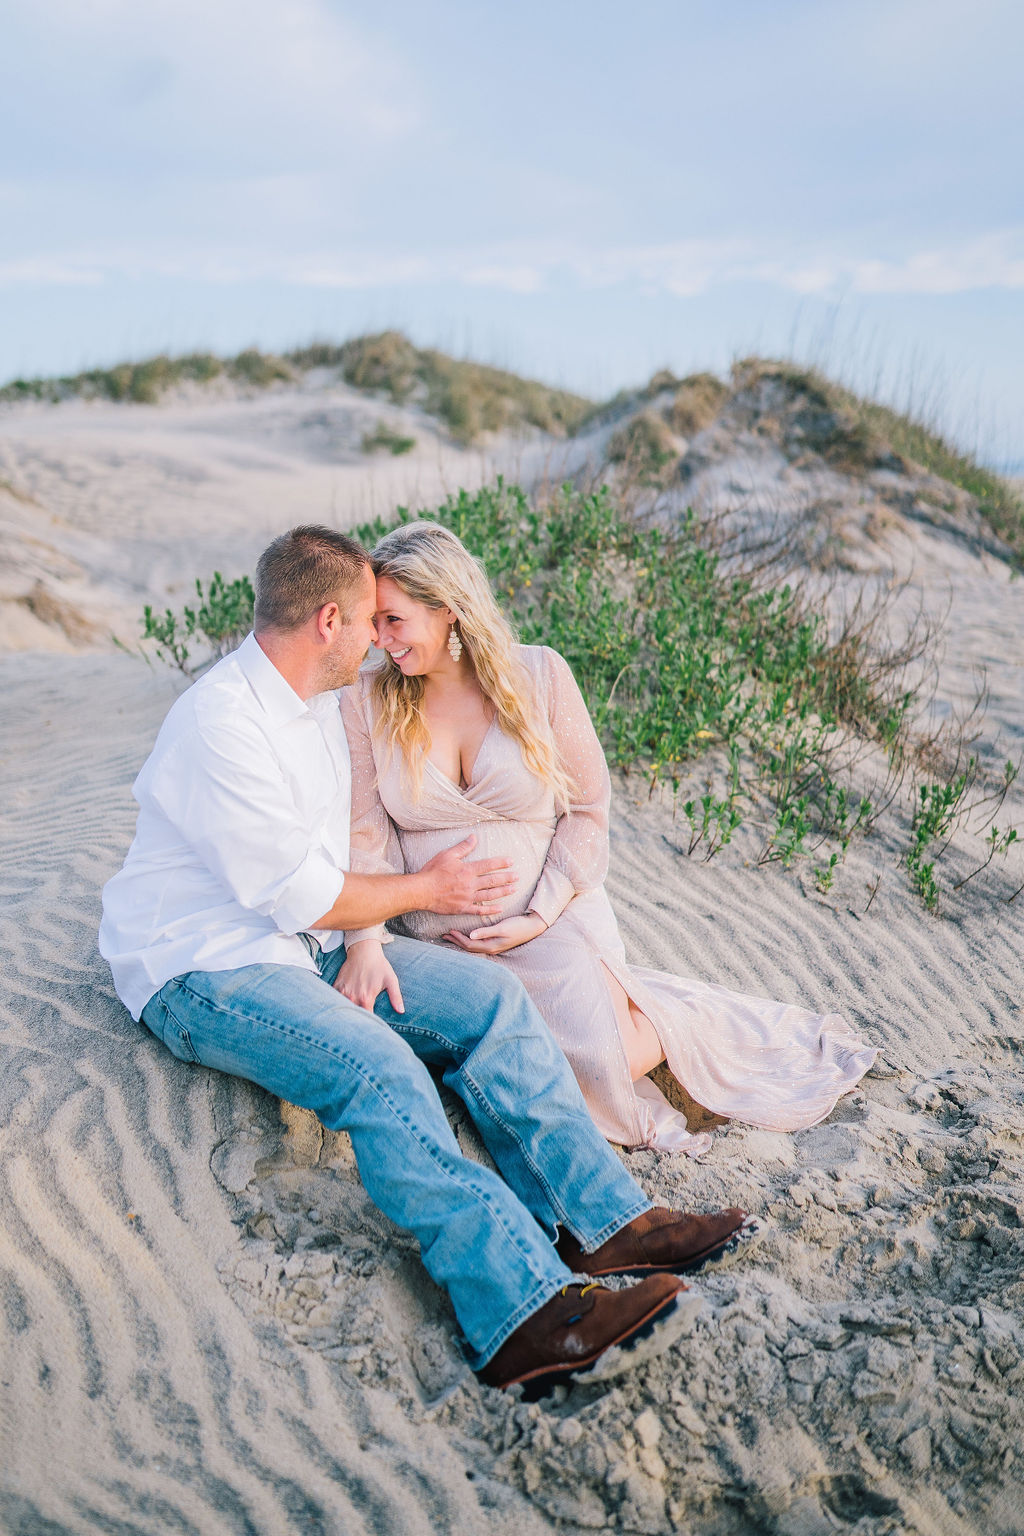 husband and wife are pregant at the beach in Outerbanks for their maternity session. They are sitting together on the sand with tall grass in the background